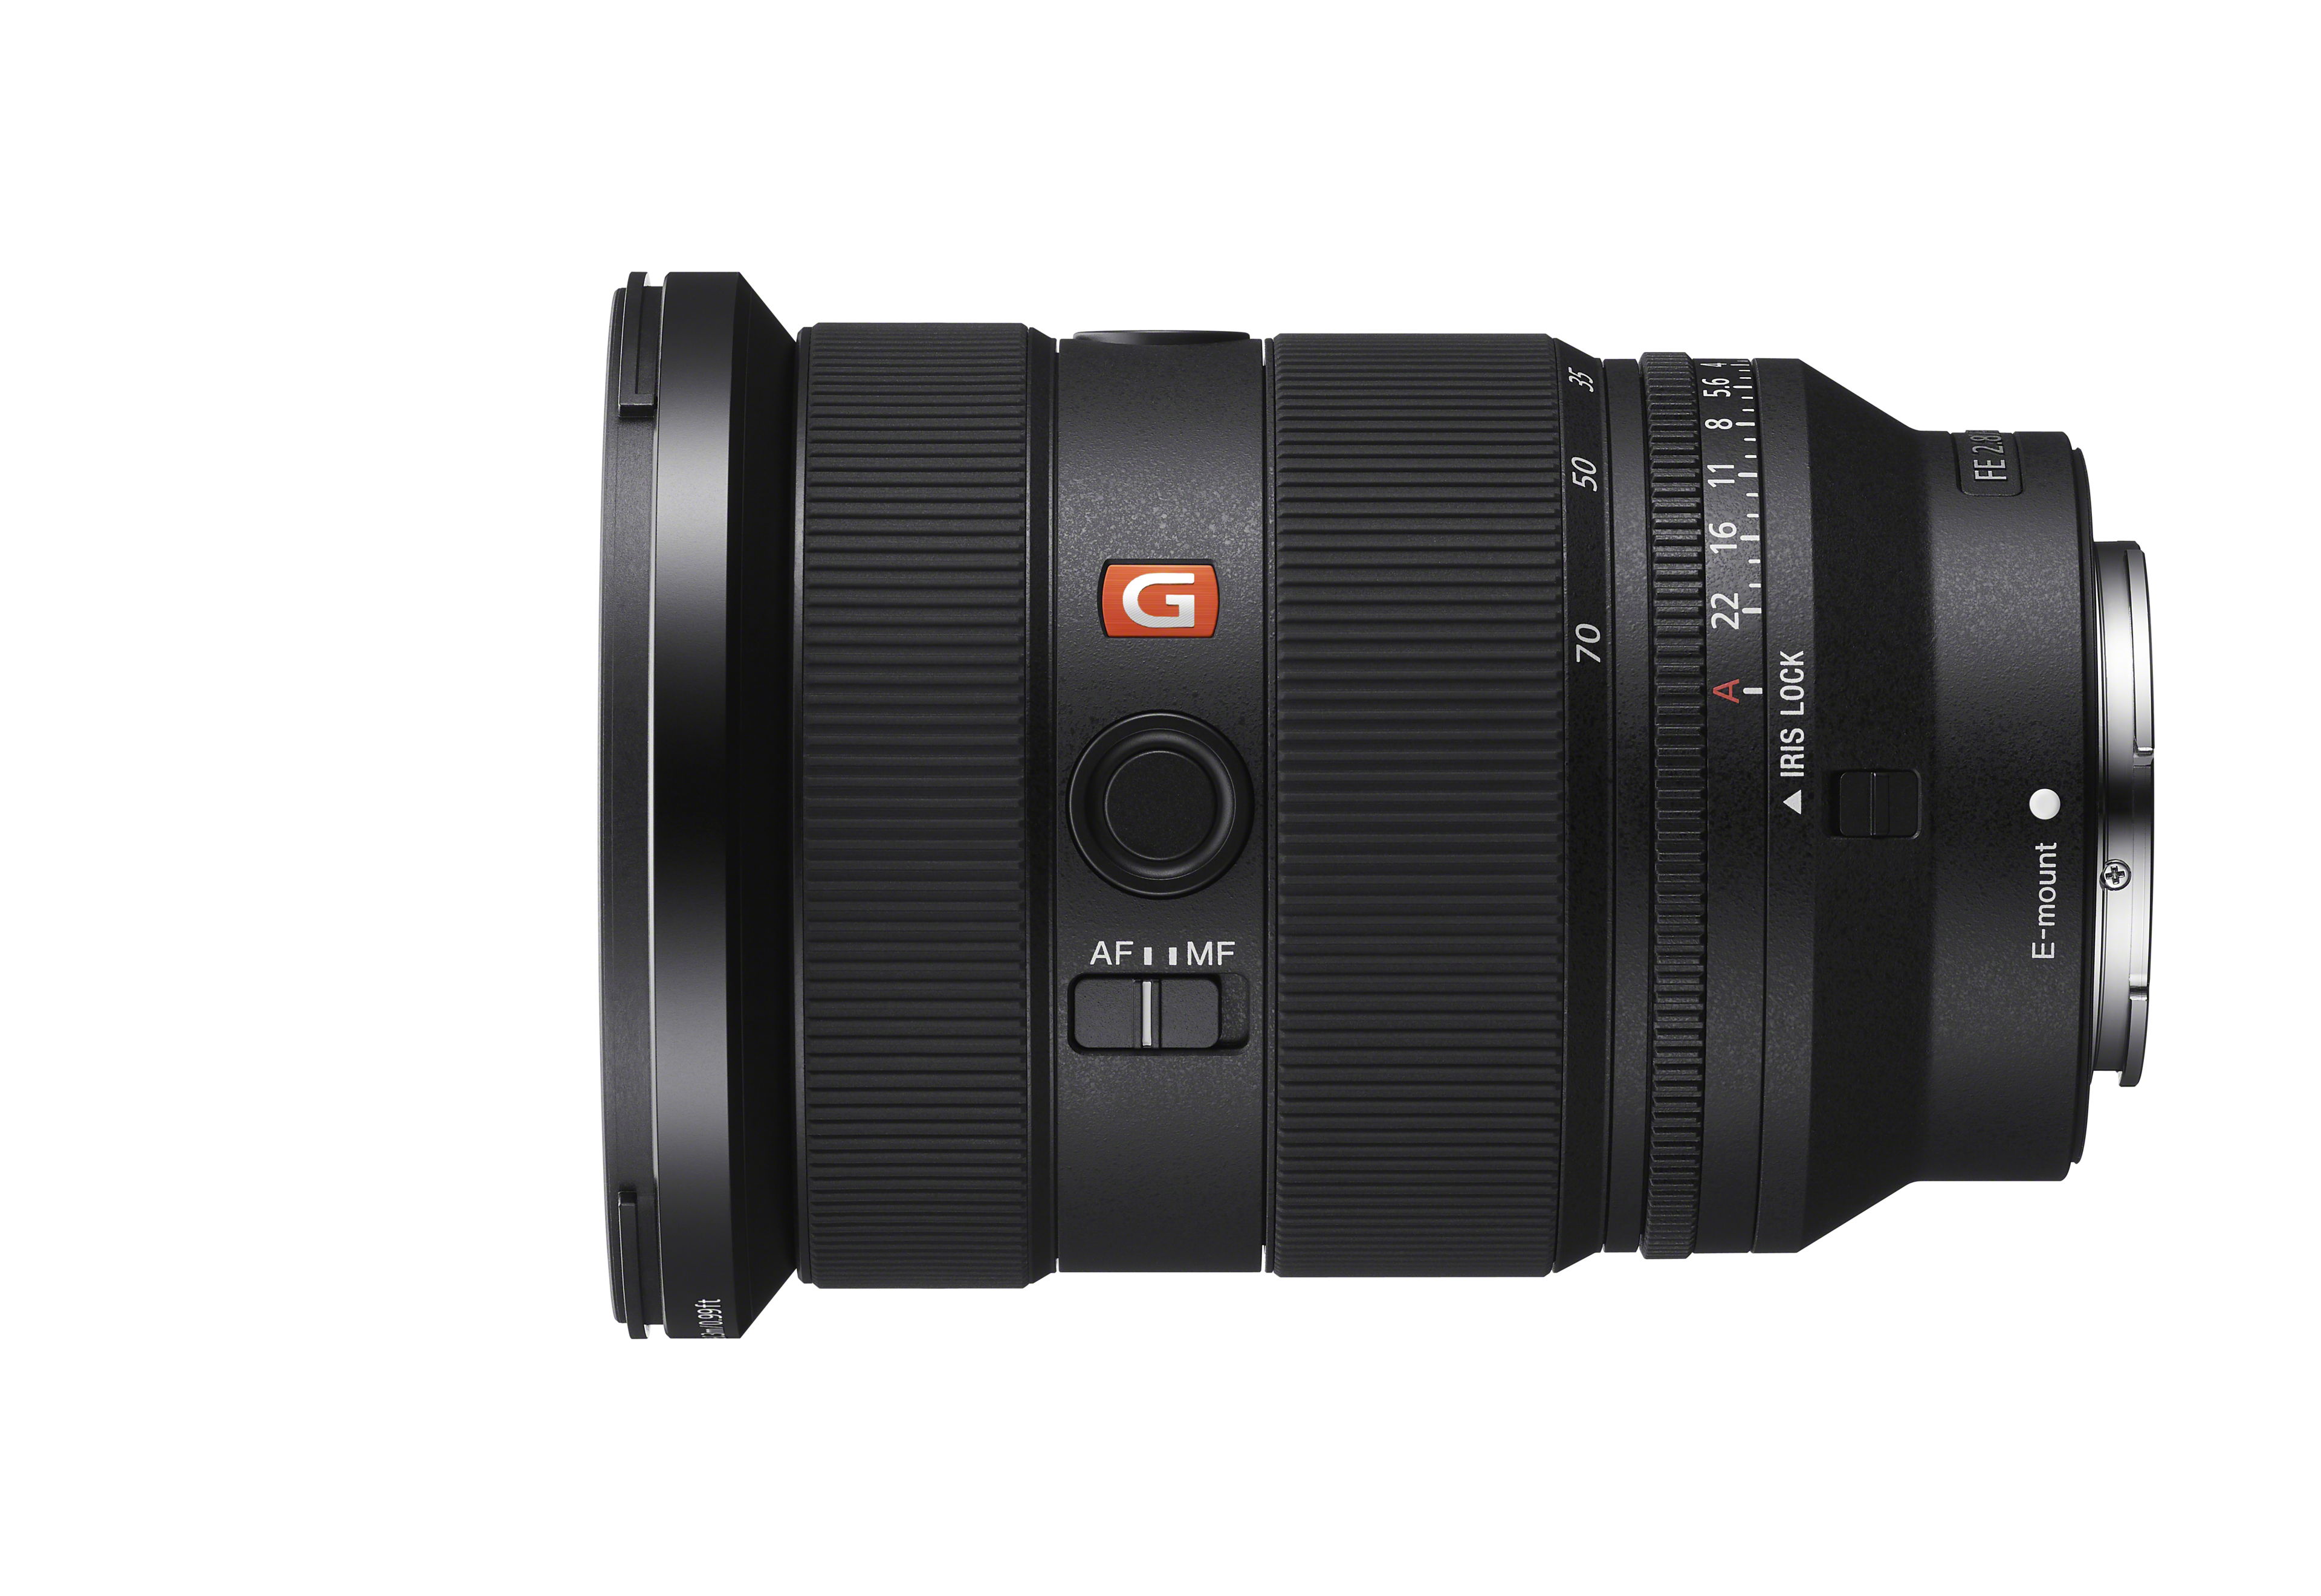 Sony Electronics Introduces New FE 24-70mm F2.8 GM II, the World’s Smallest and Lightest F2.8 Standard Zoom Lens